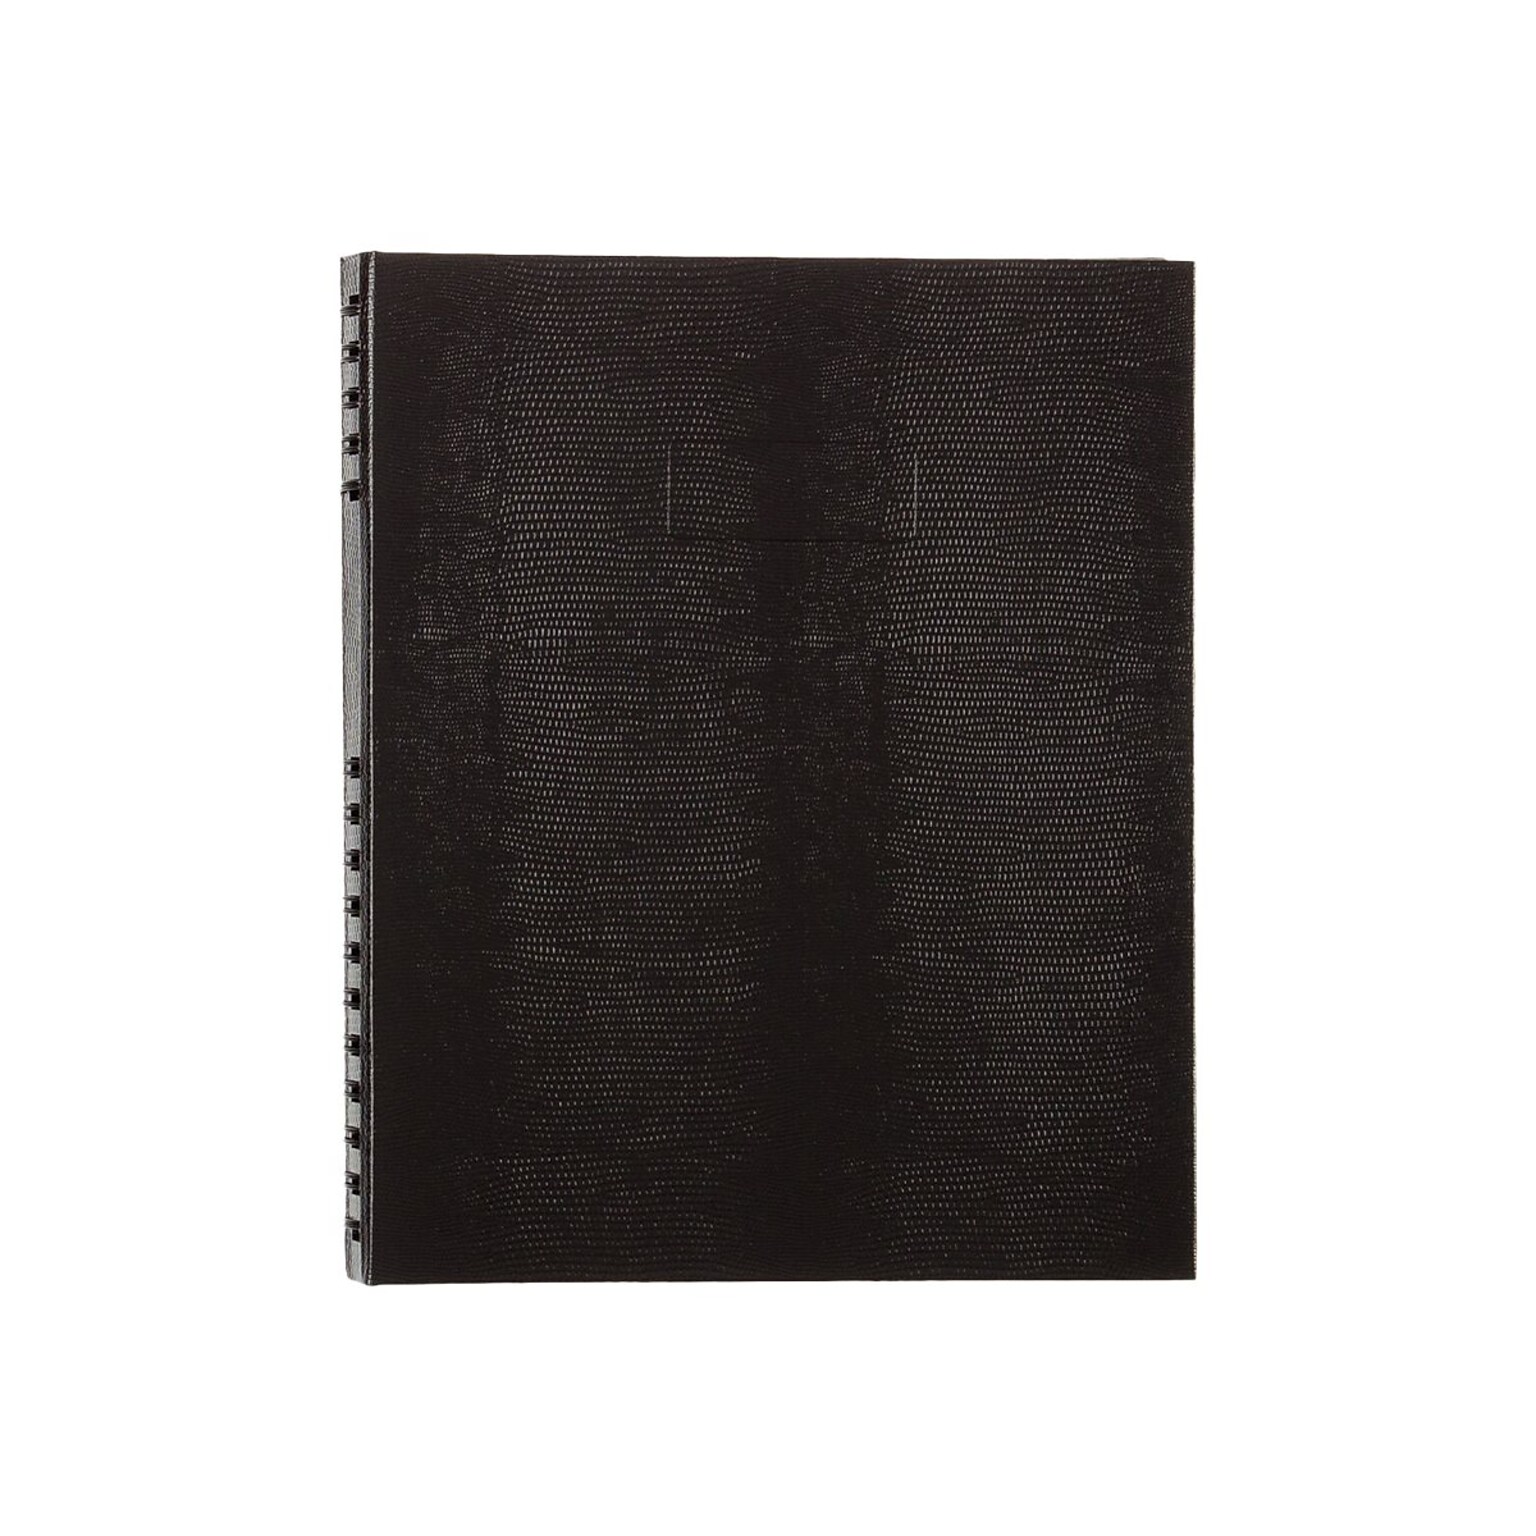 Blueline NotePro 1-Subject Professional Notebooks, 8.5 x 10.75, College Ruled, 150 Sheets, Black (A10300.BLK)